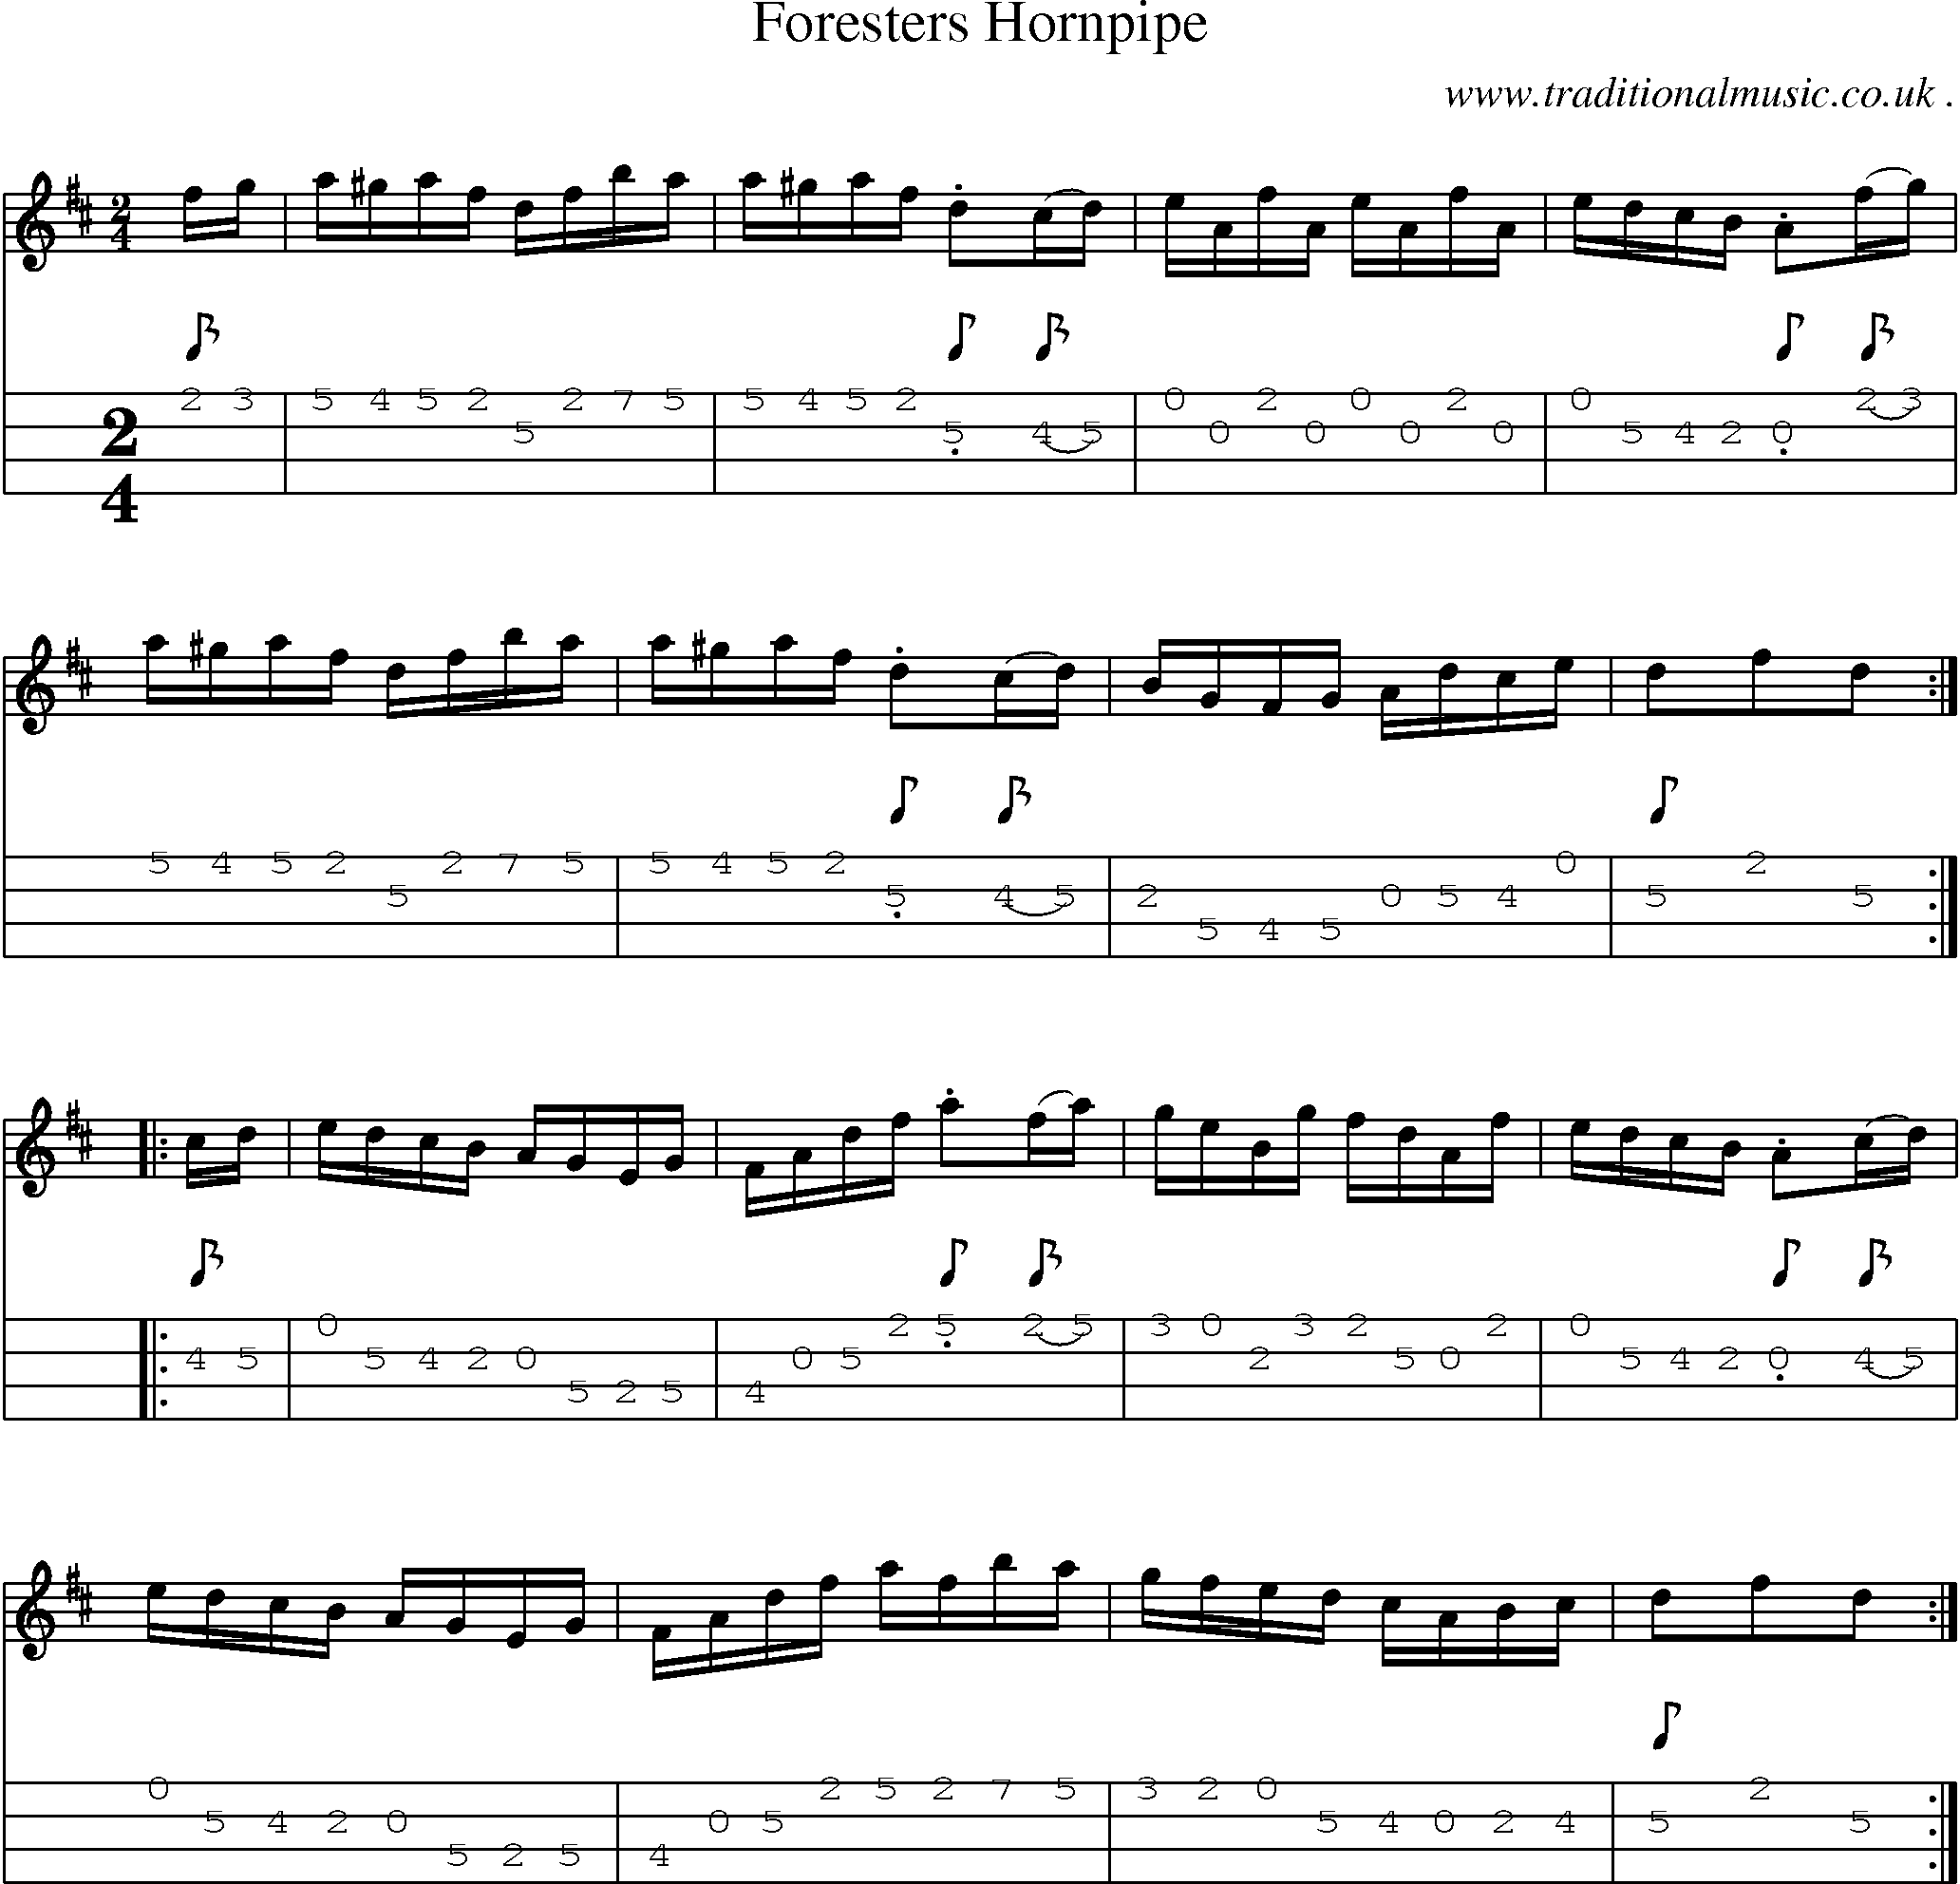 Sheet-Music and Mandolin Tabs for Foresters Hornpipe